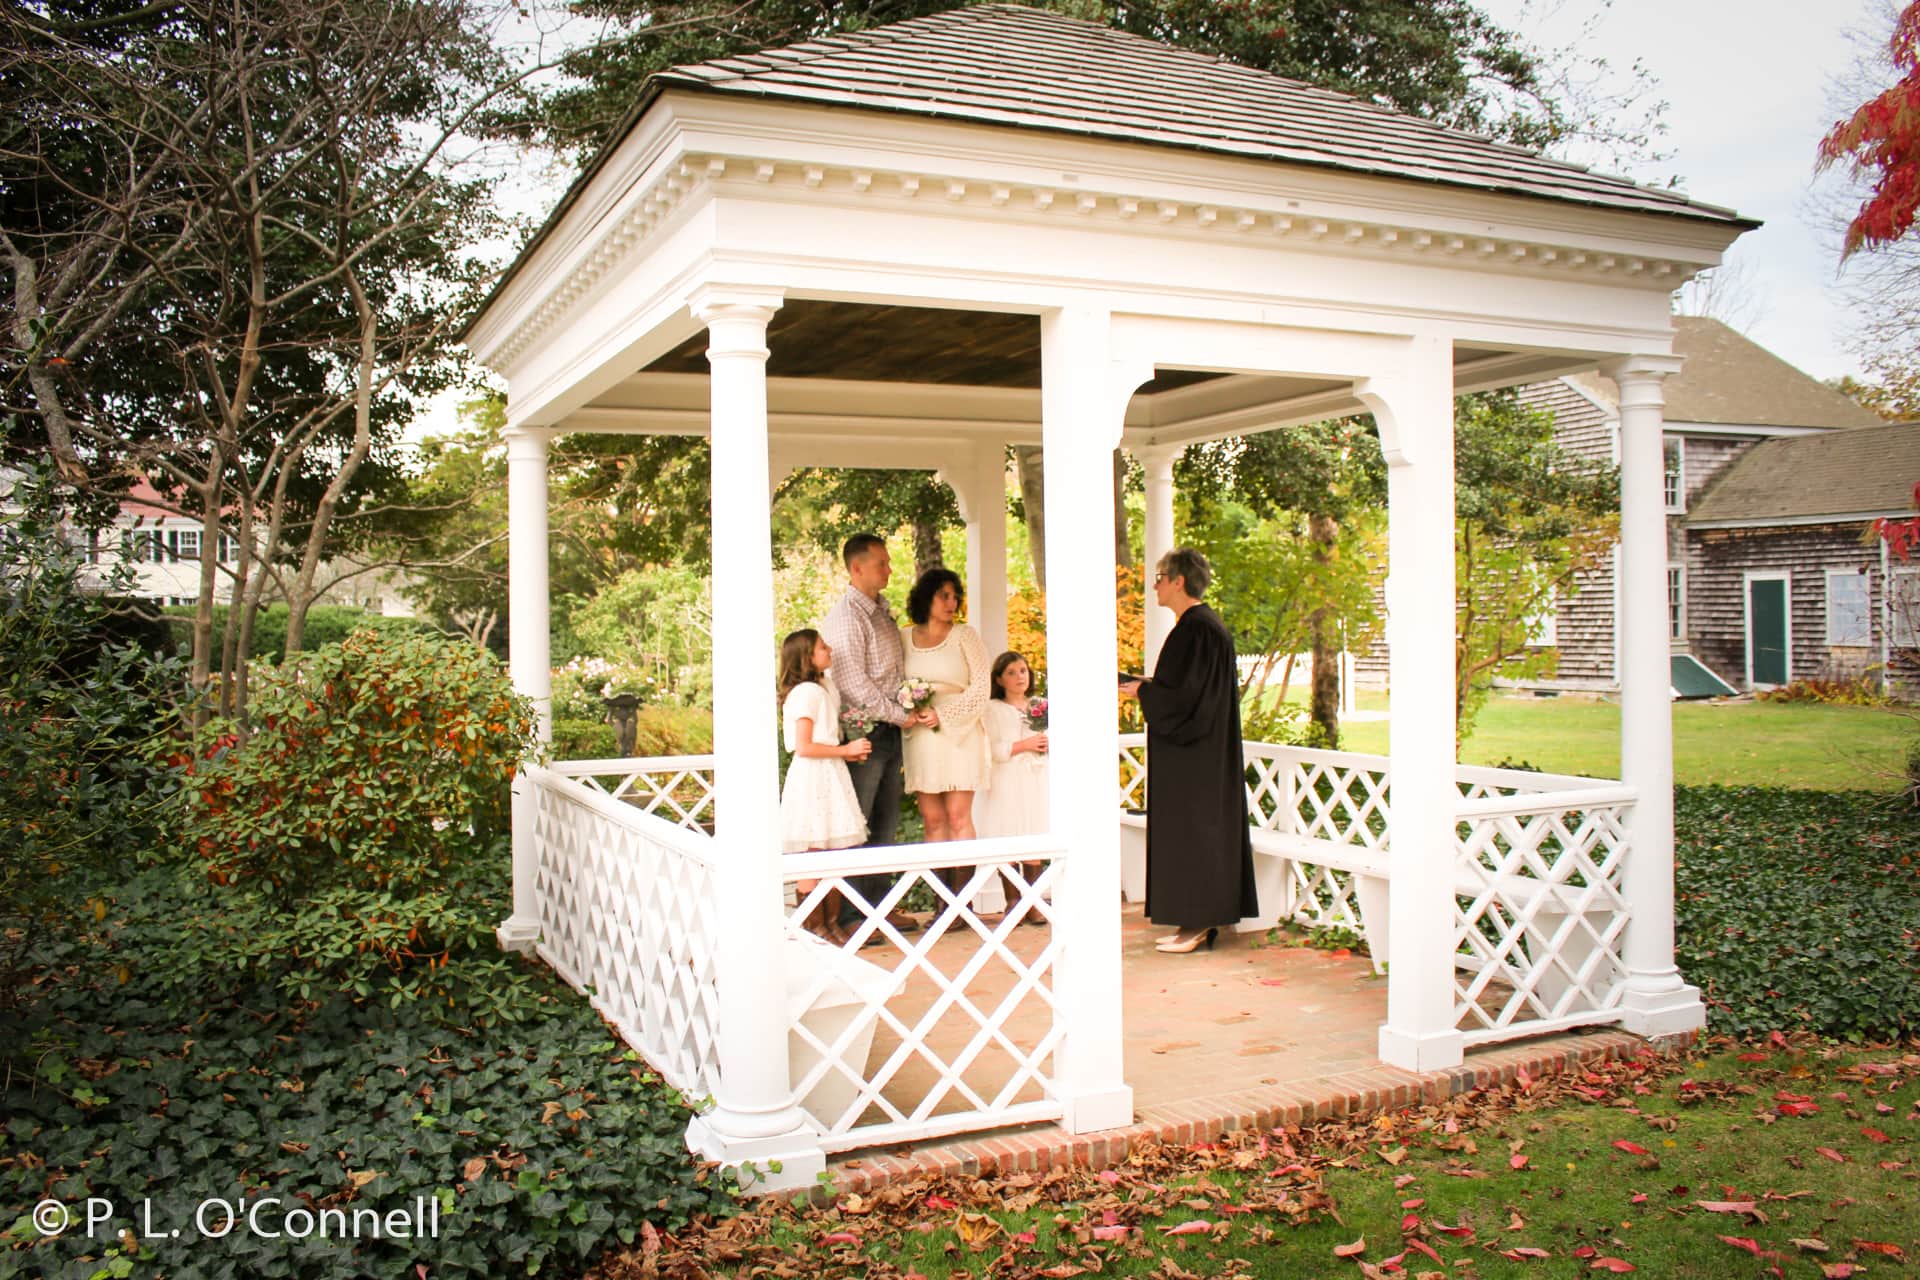 Wedding ceremony in the gazebo at the Museums on the Green in Falmouth, Cape Cod, Massachusetts, USA.